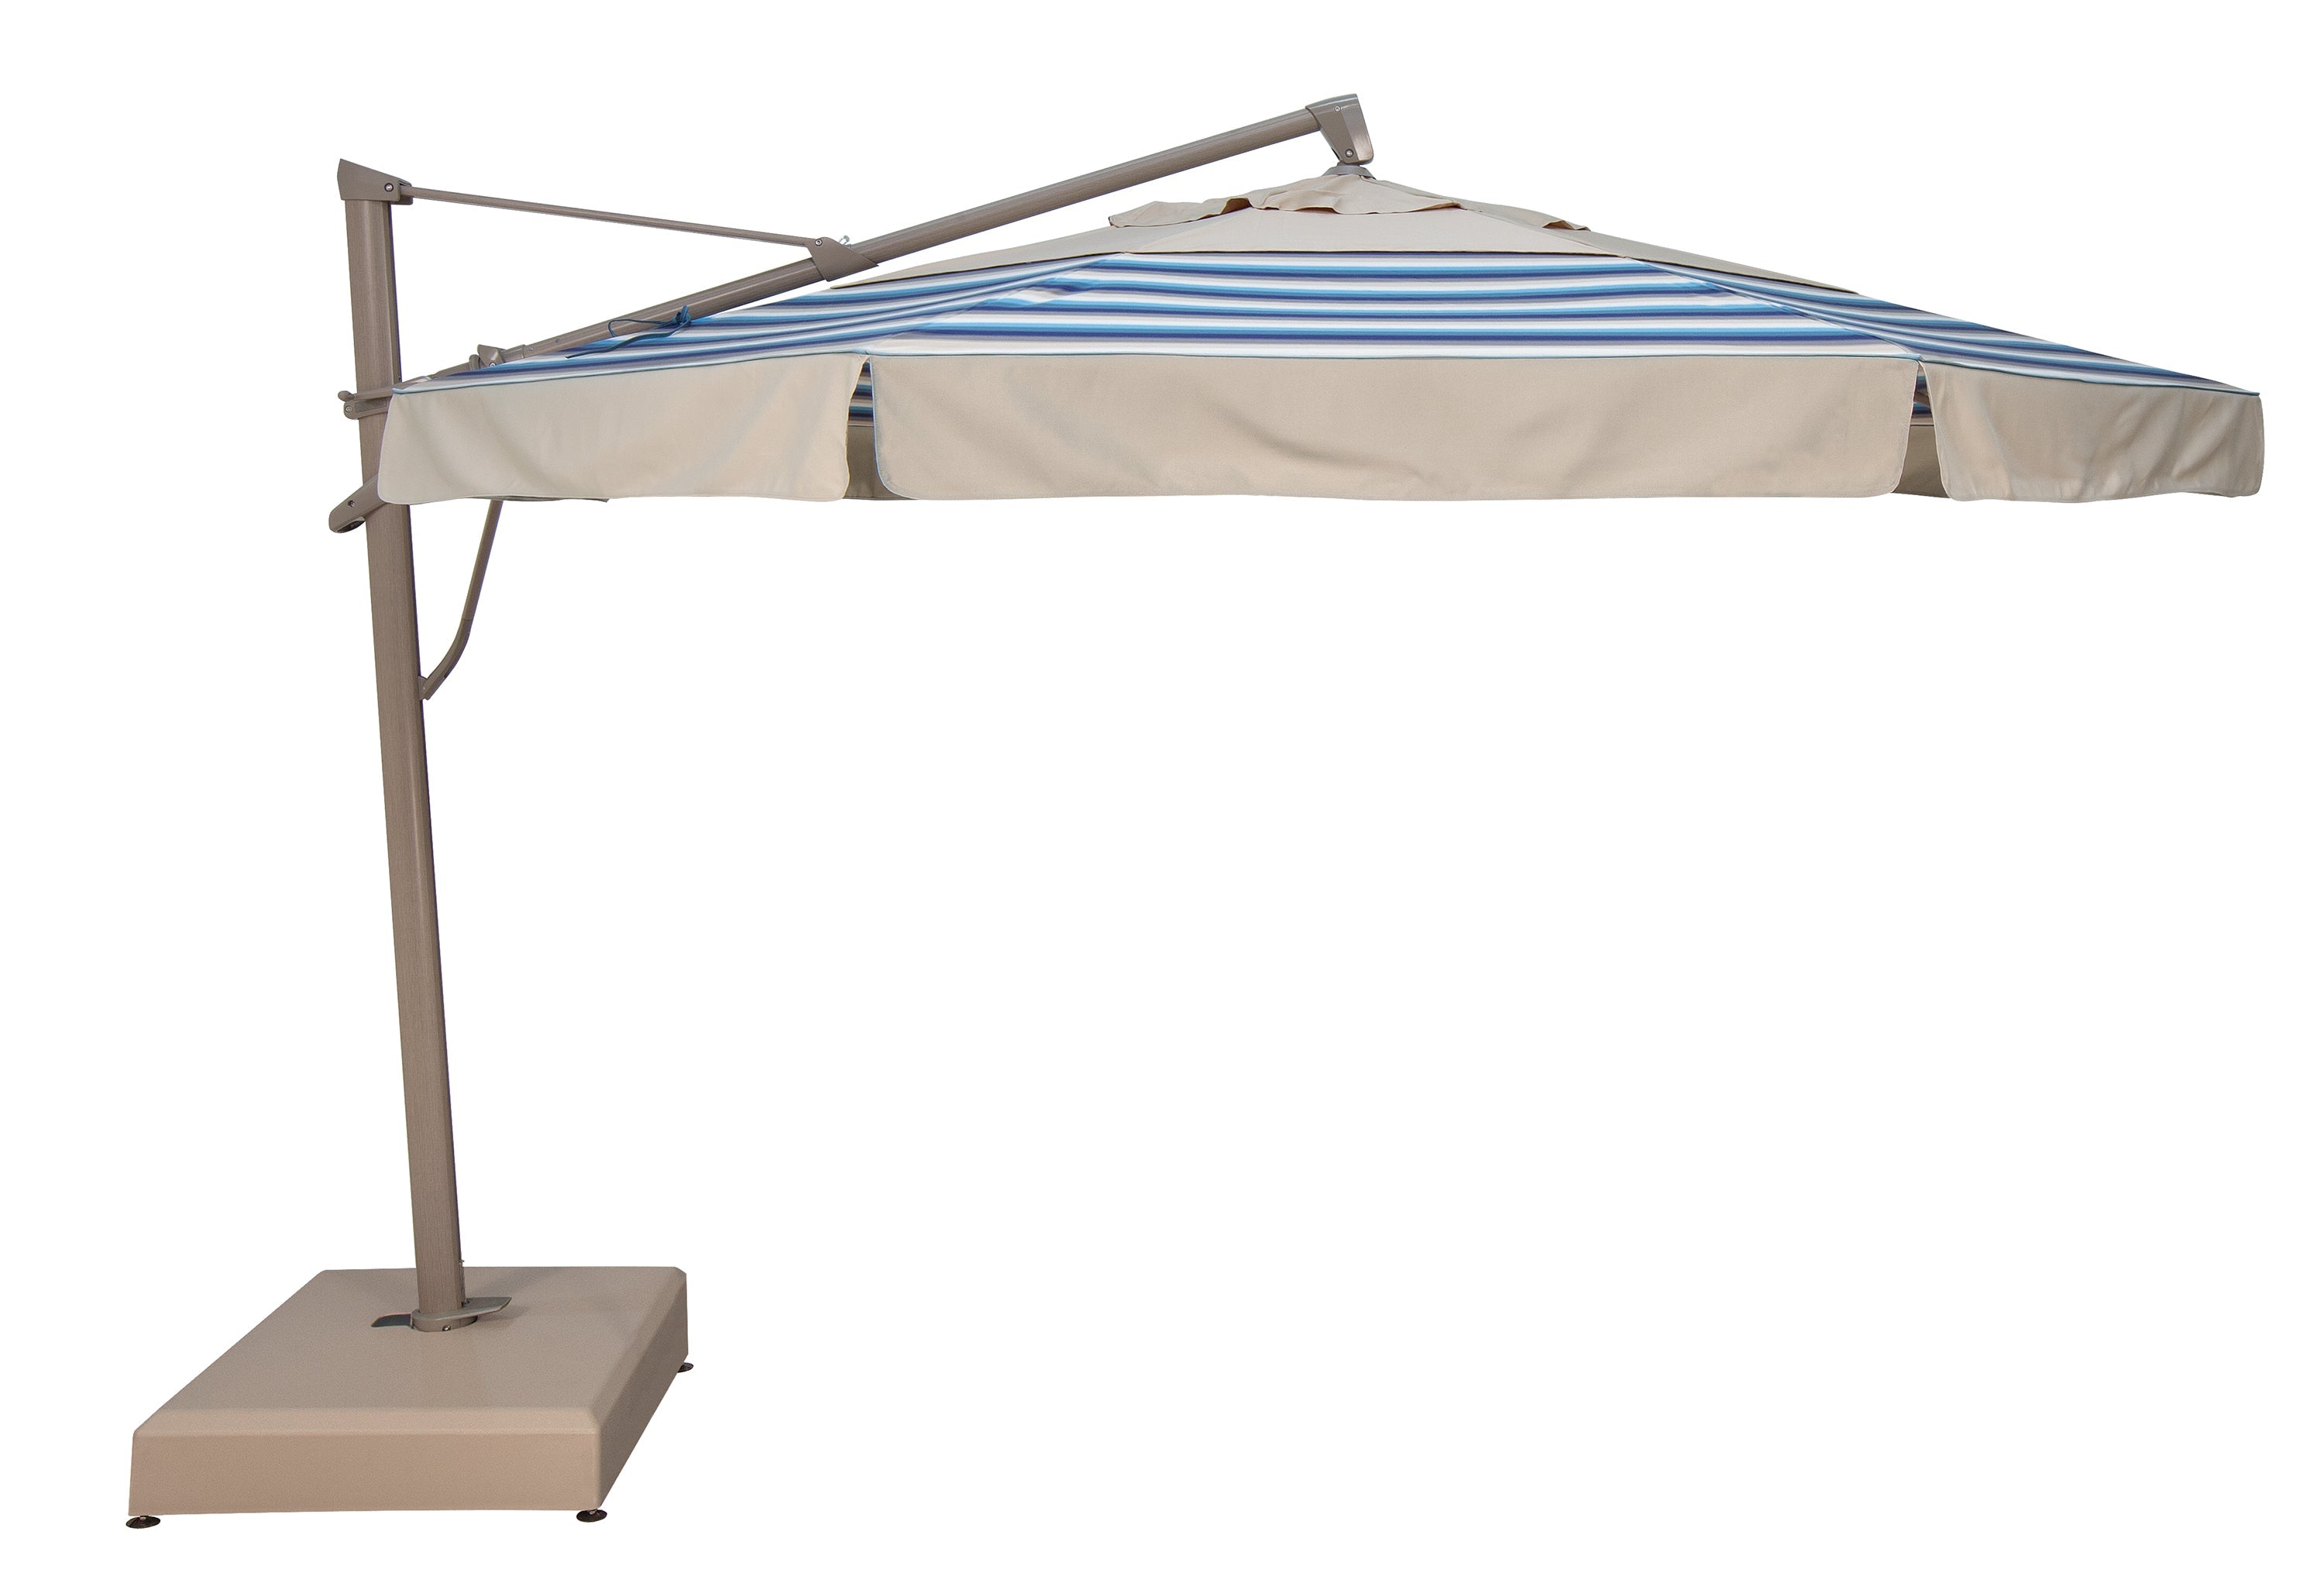 11' AKZ PLUS - Octagonal Cantilever Umbrella With Valance